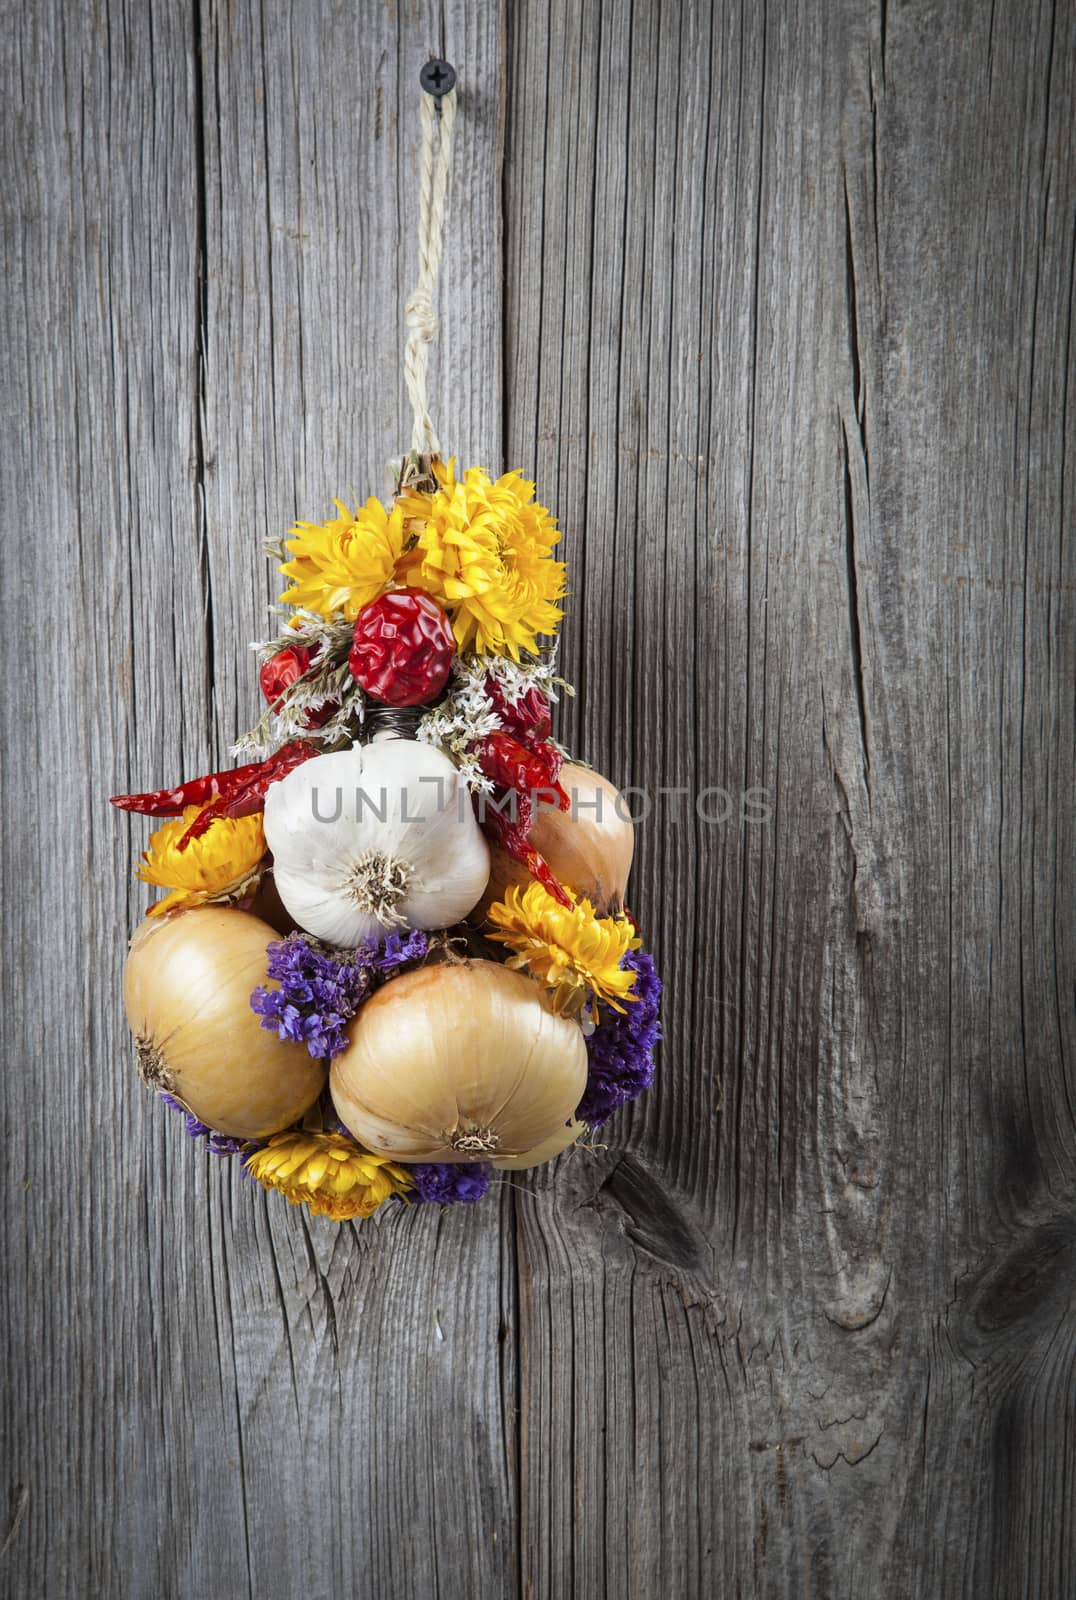 Braided bunch with onions, garlic and flowers, on wooden background